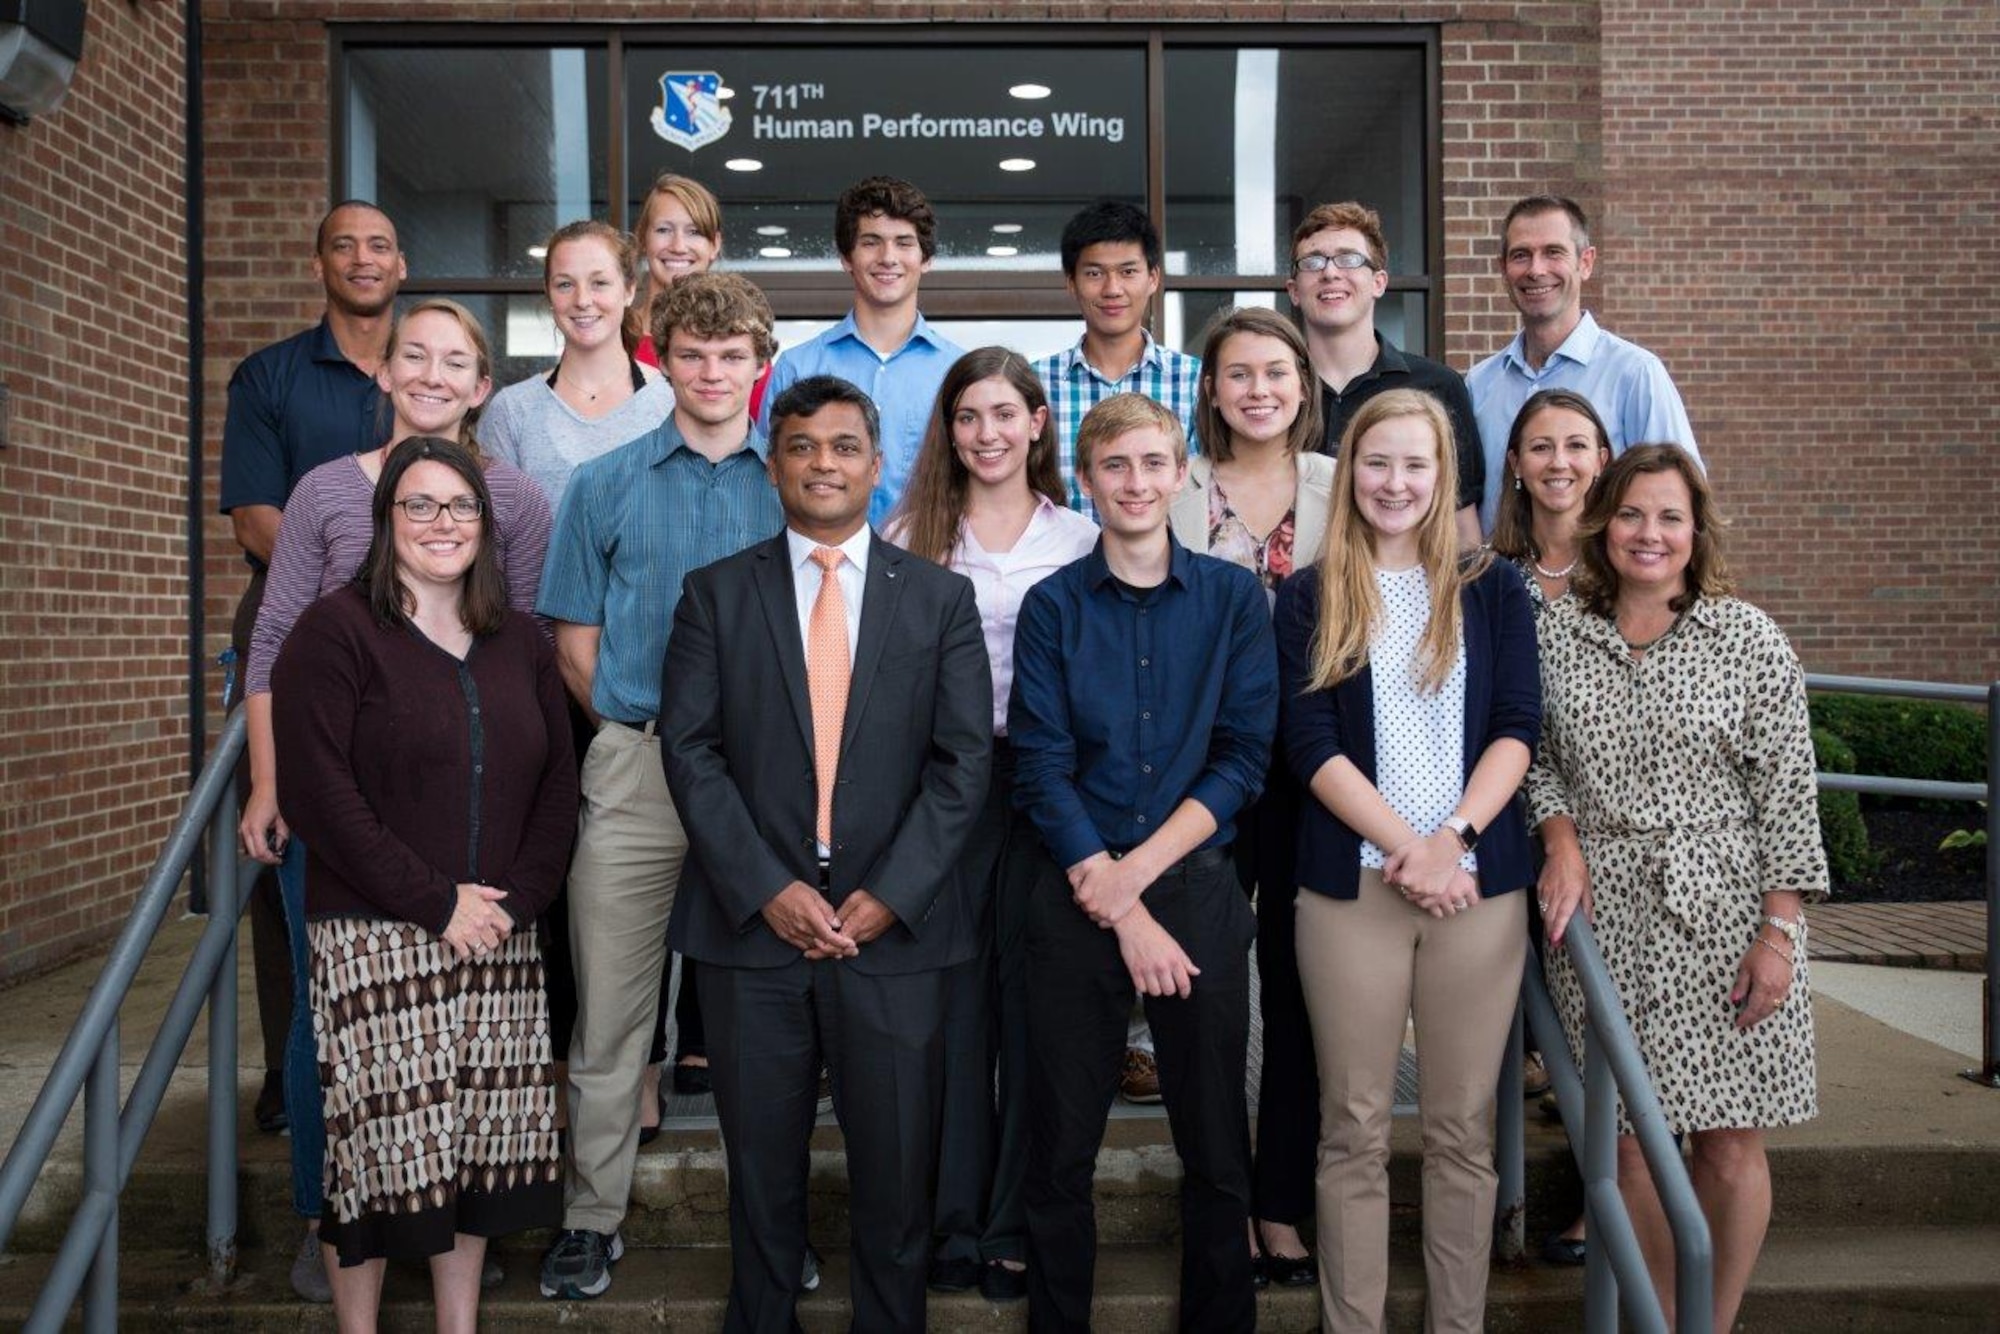 Members of the Air Force Research Laboratory-Carroll High School iGEM team stand with their CHS teachers and AFRL mentors in front of the 711th Human Performance Wing headquarters building following a presentation given to the 711HPW Chief Scientist Dr. Rajesh Naik (front, second from left).  (U.S. Air Force photo/Richard Eldridge)